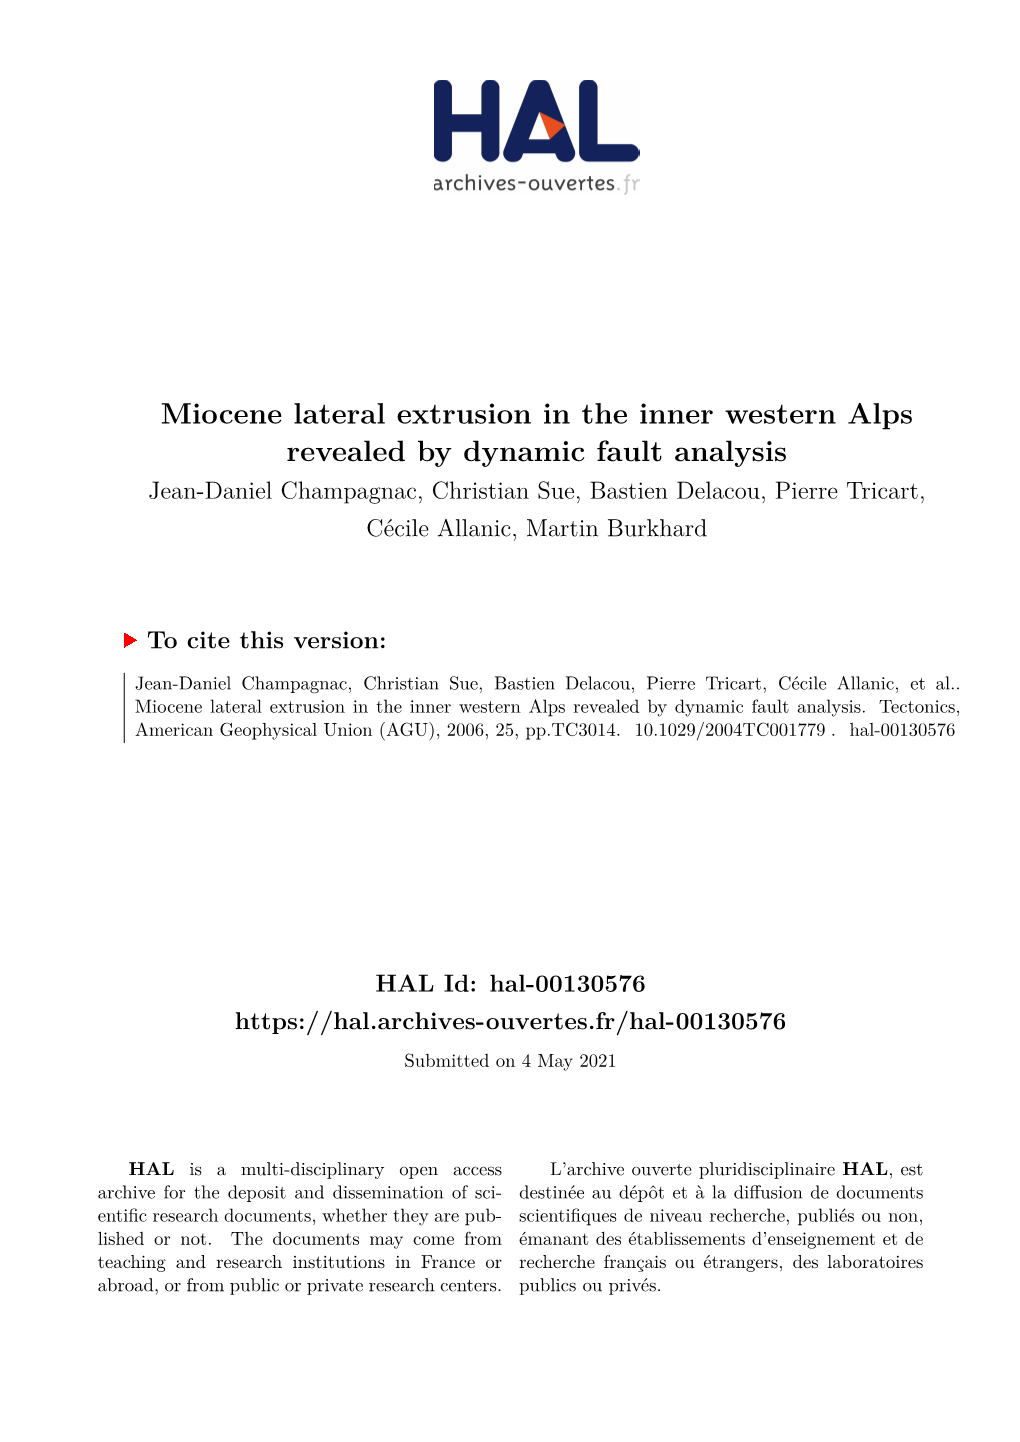 Miocene Lateral Extrusion in the Inner Western Alps Revealed by Dynamic